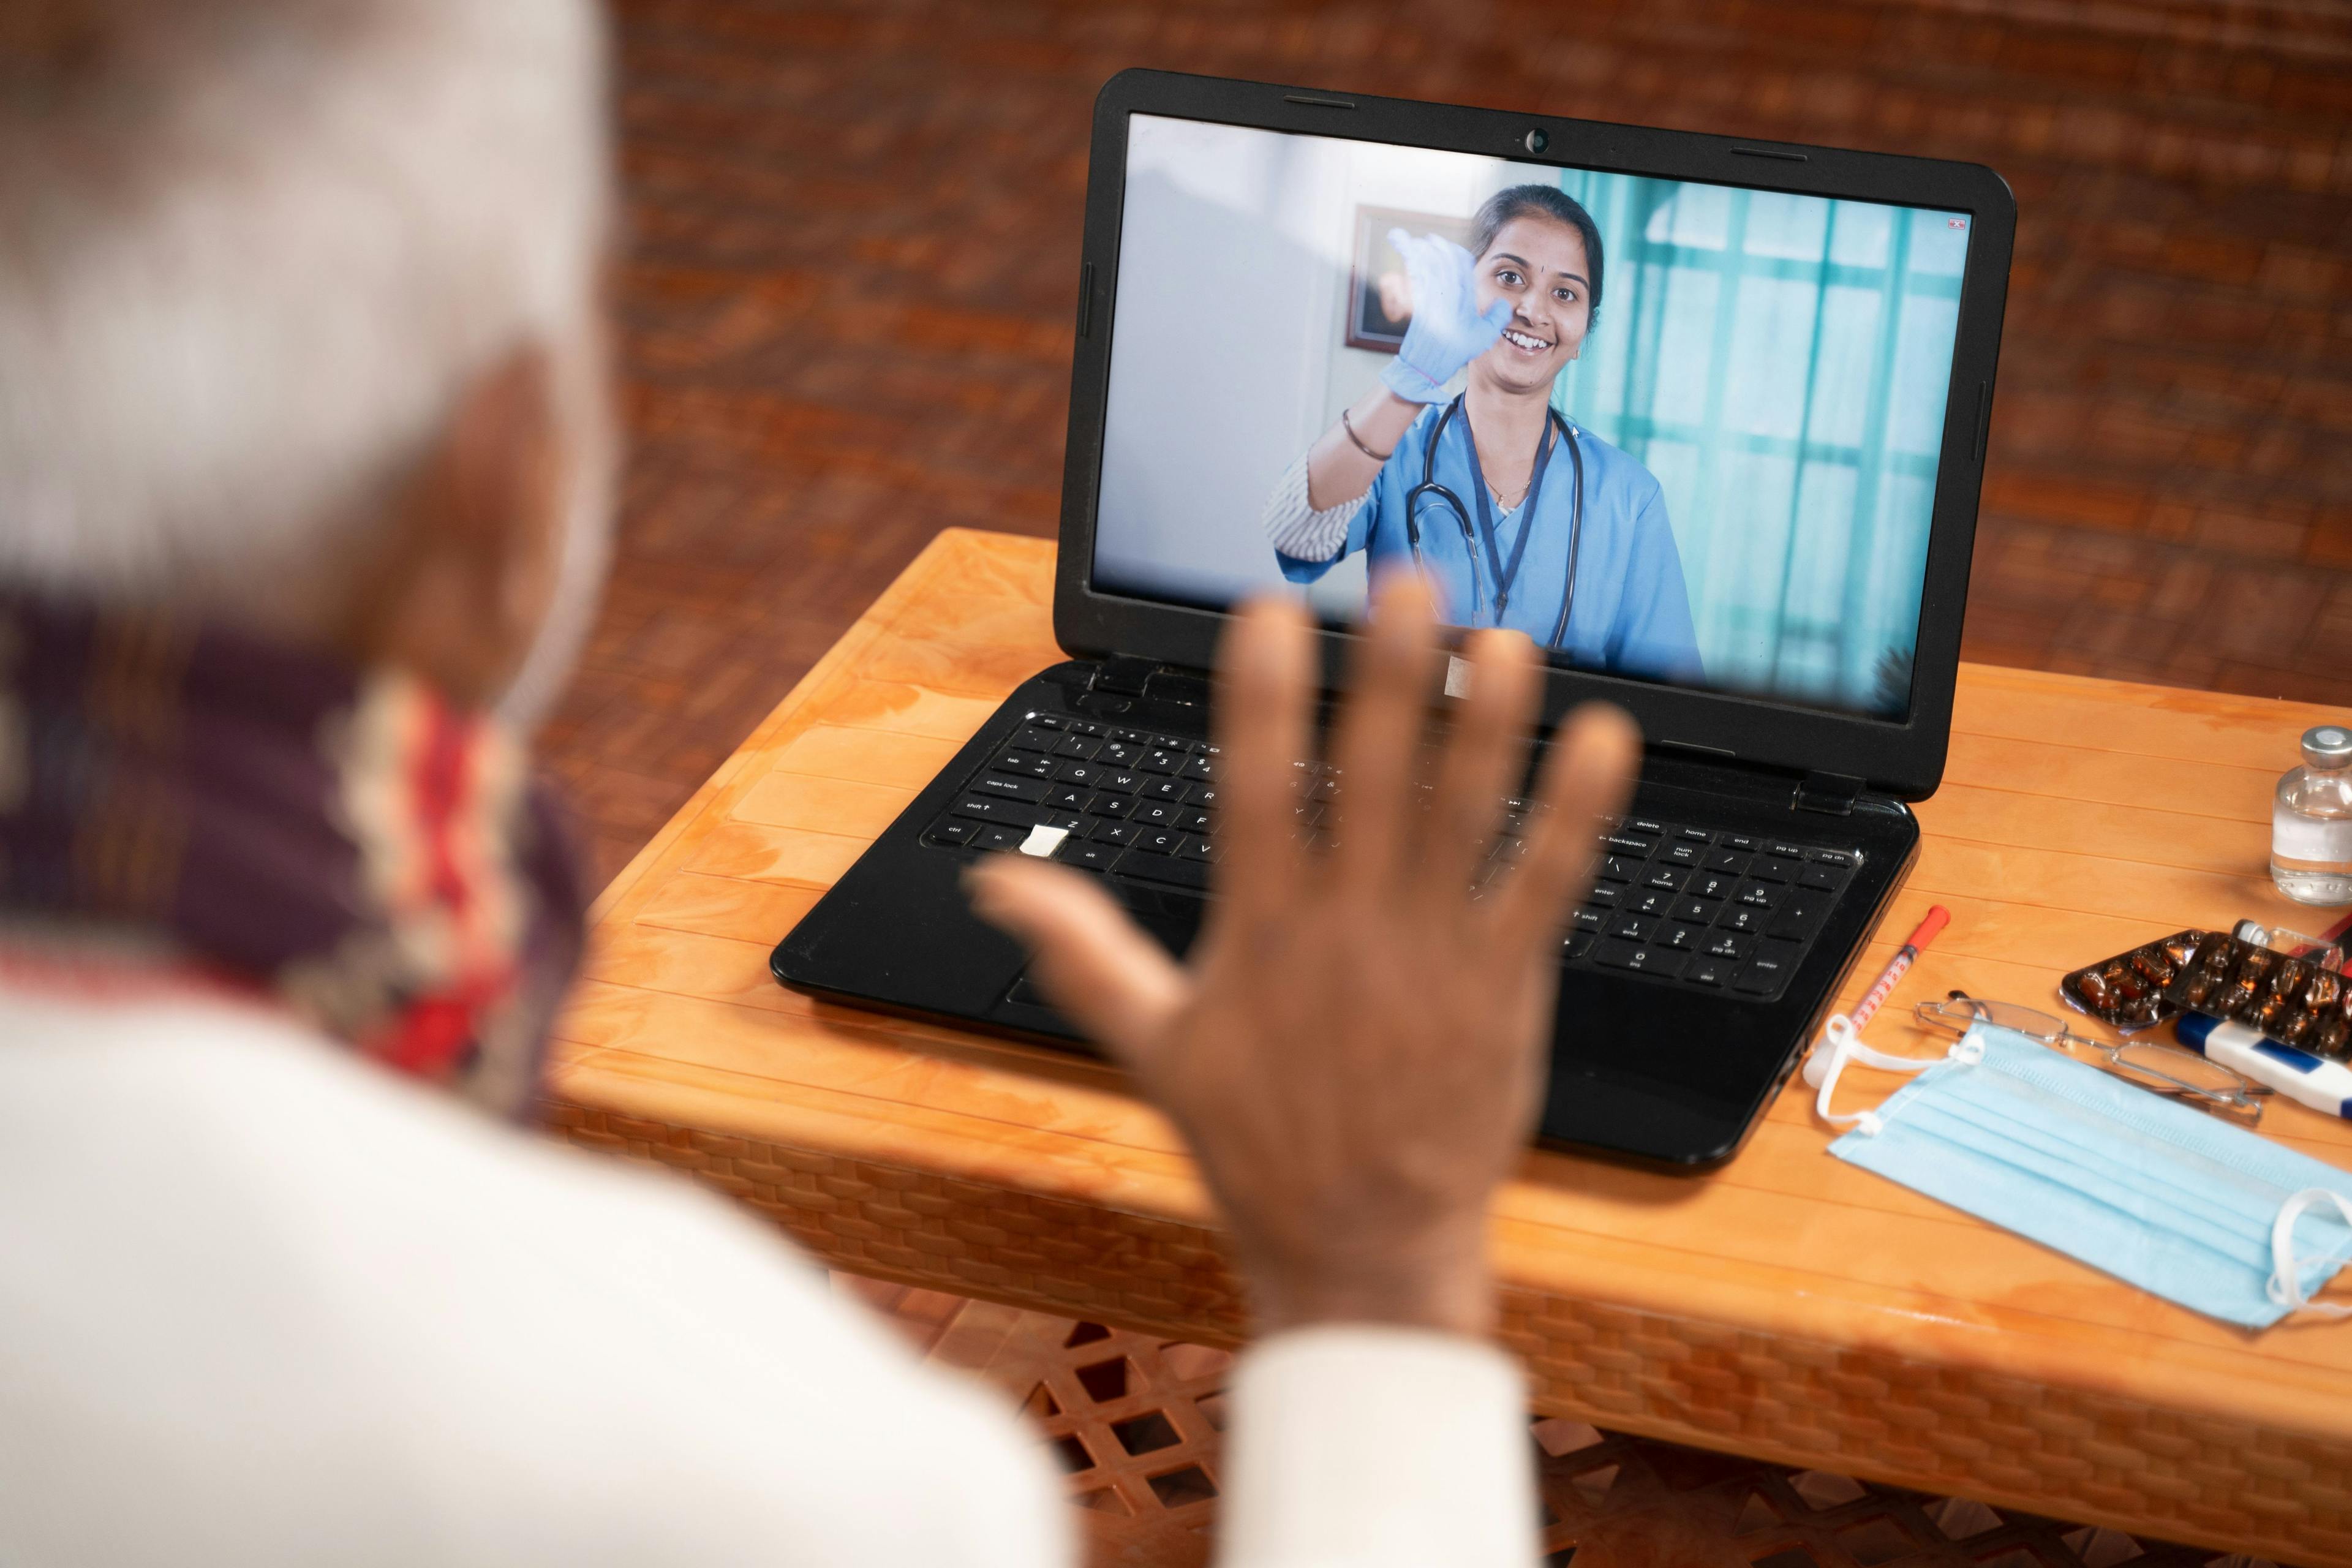 Telehealth Exercise Interventions Feasible, Safe for Those With Advanced Melanoma